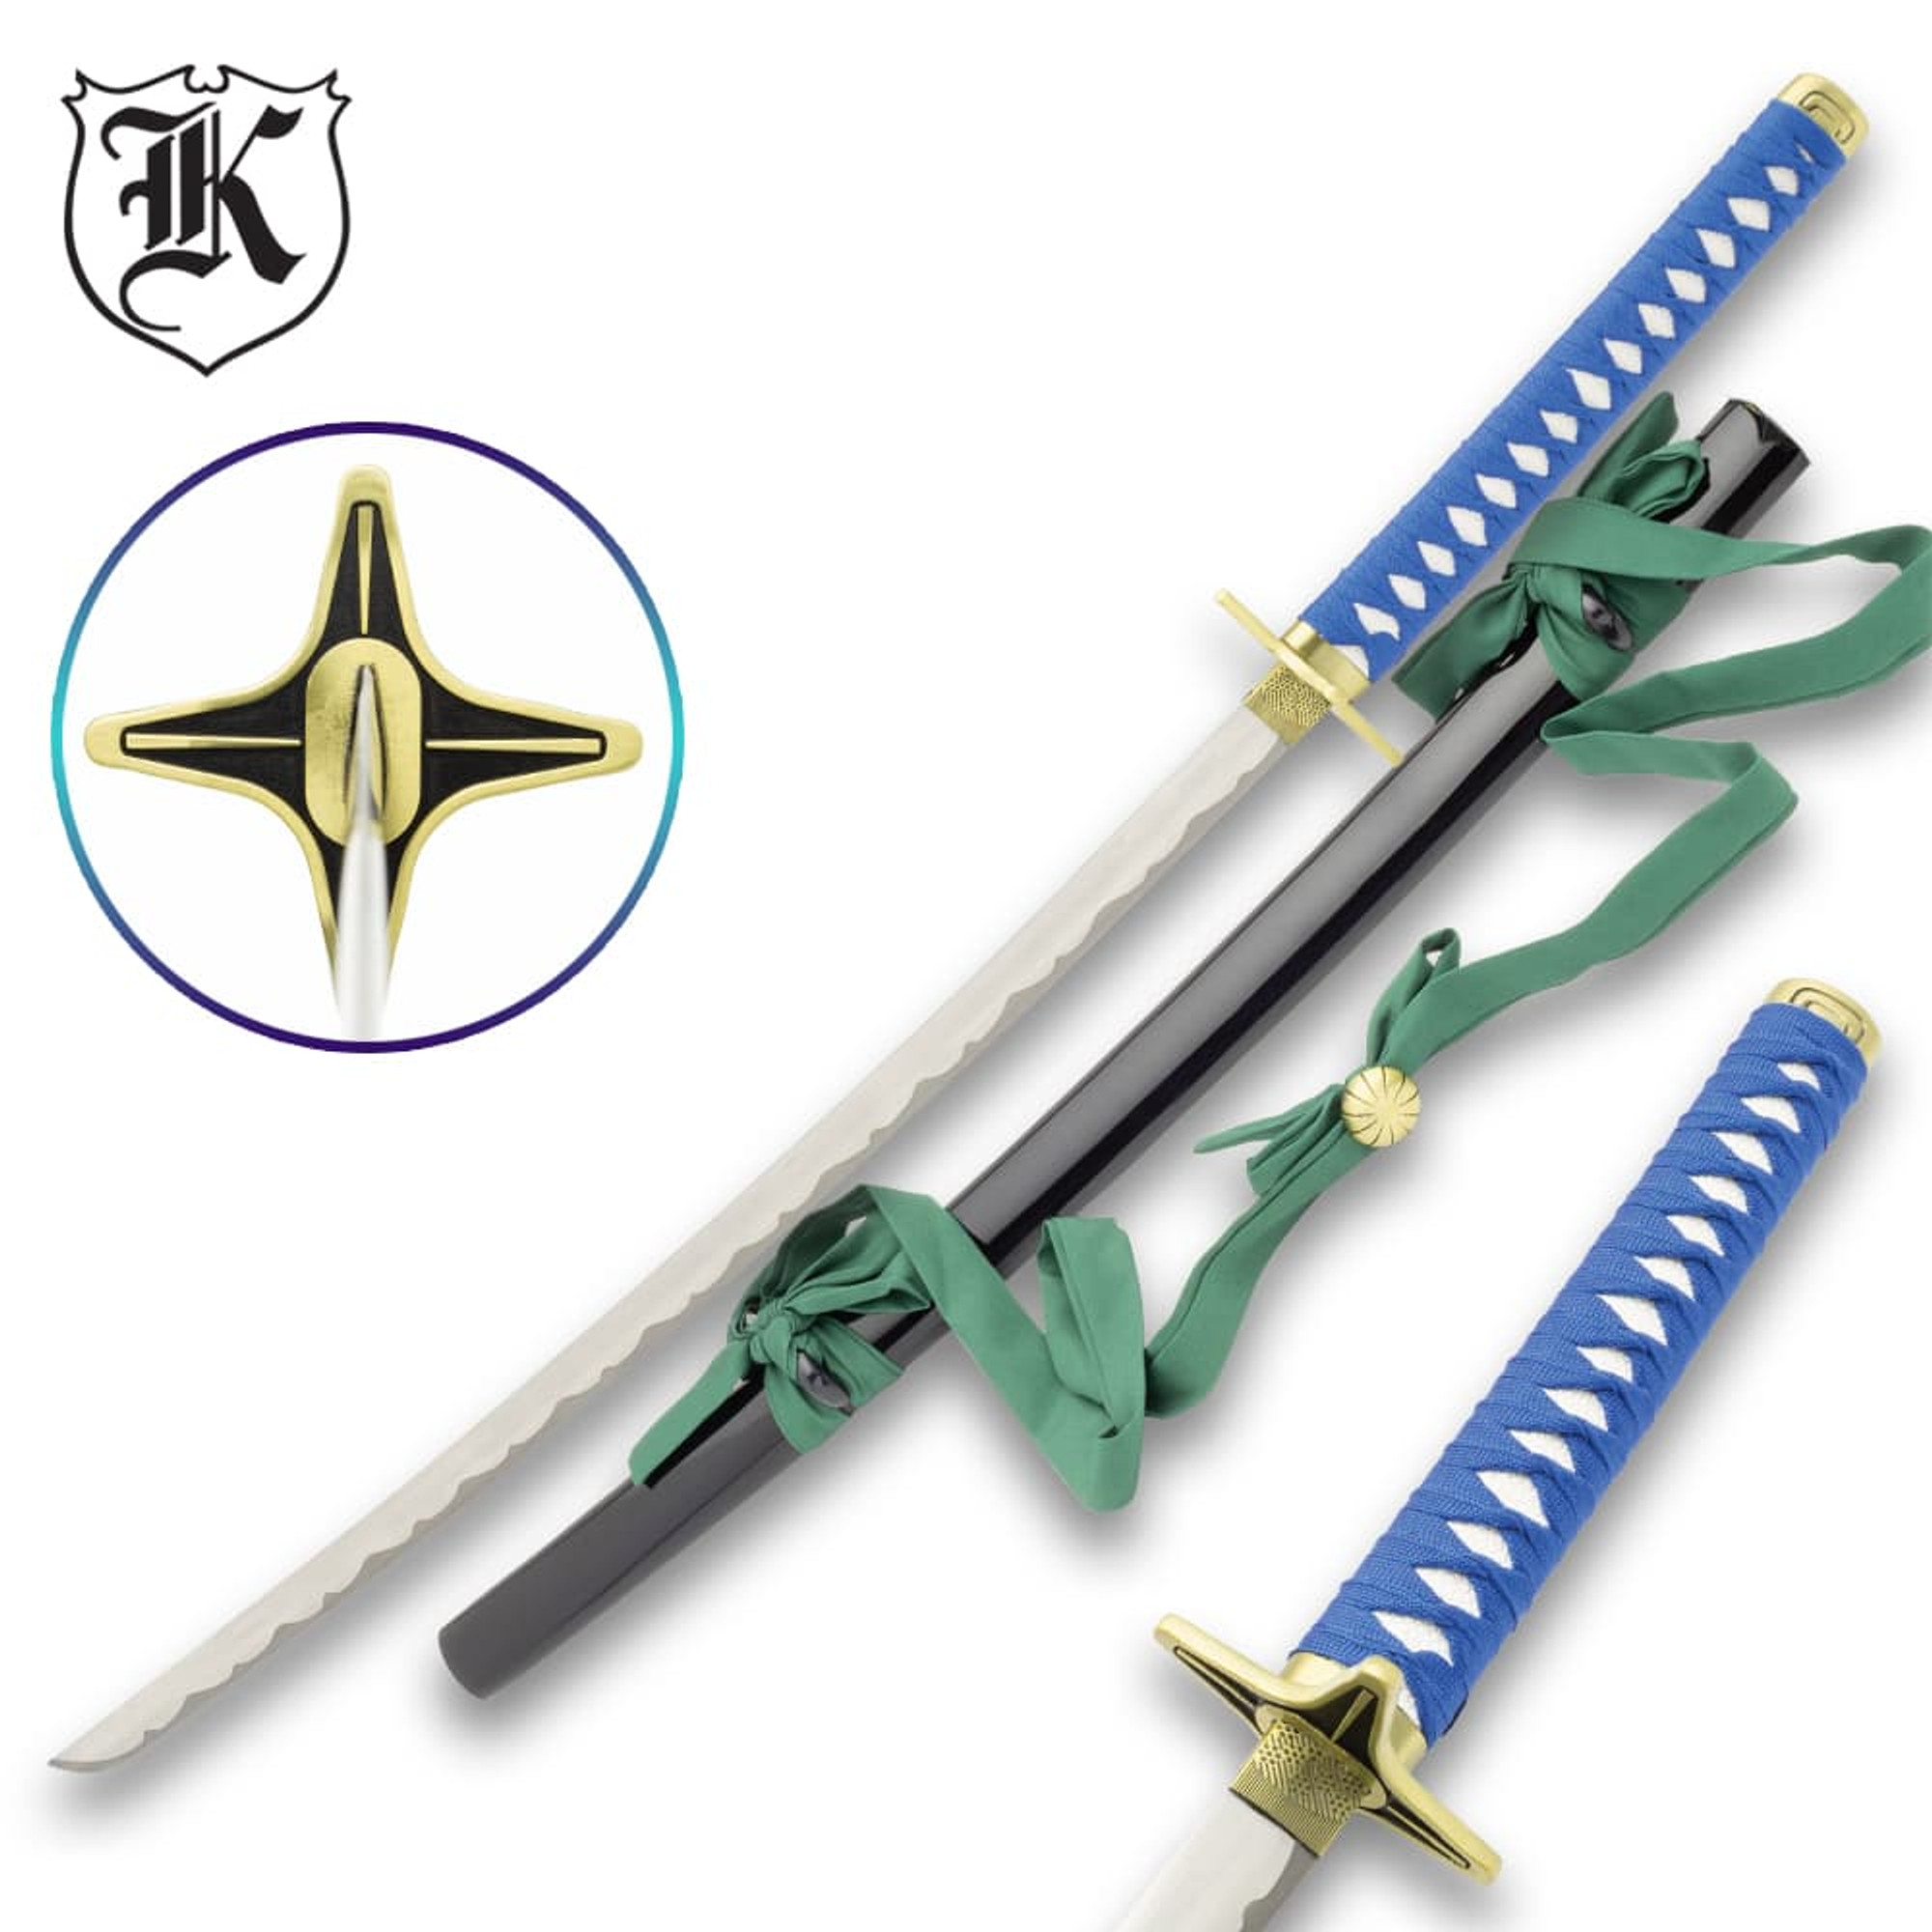 Fantasy Slayer Foam Sword Lighting Foam Katana Props Replica. for  Collections, Gifts, Cosplay for Anime Shows White-Yellow : Amazon.in: Toys  & Games